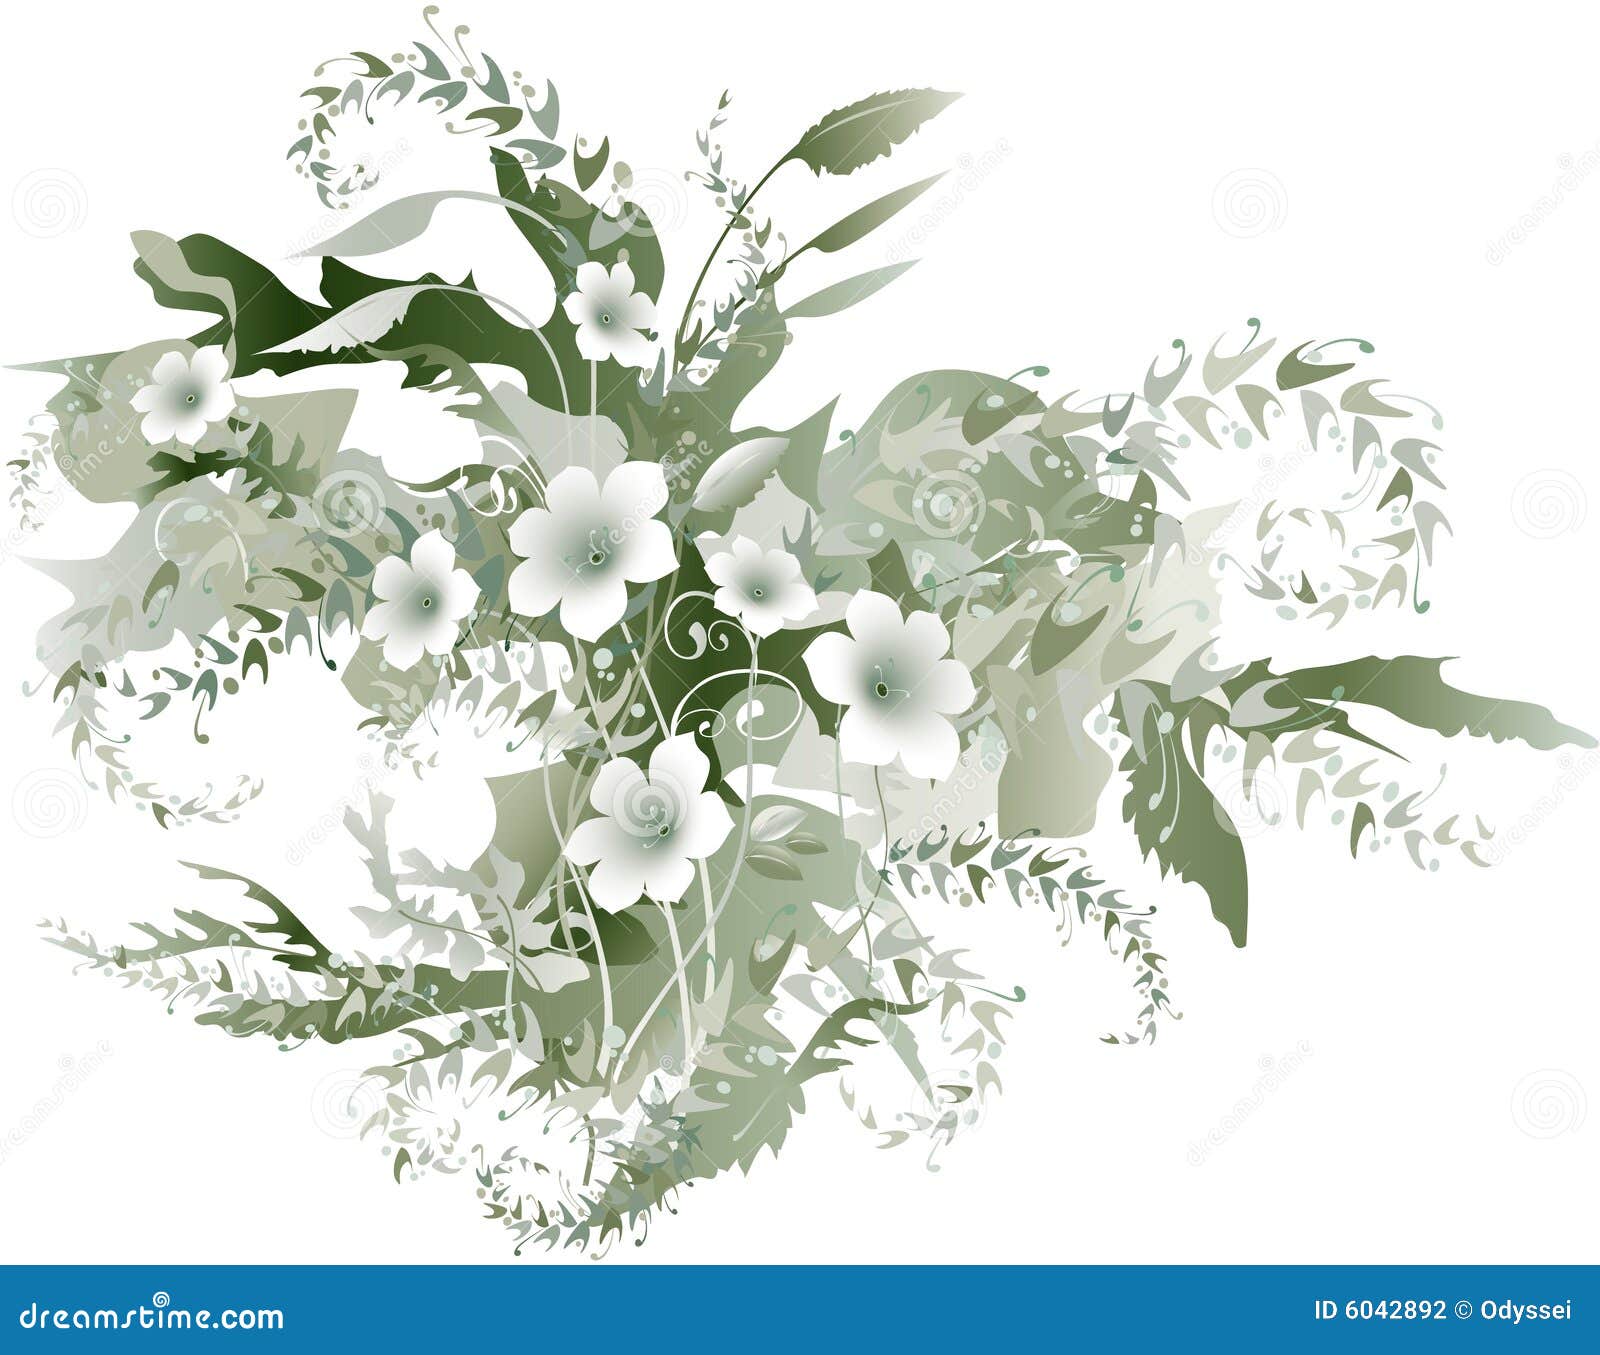 clipart delicate flowers - photo #4